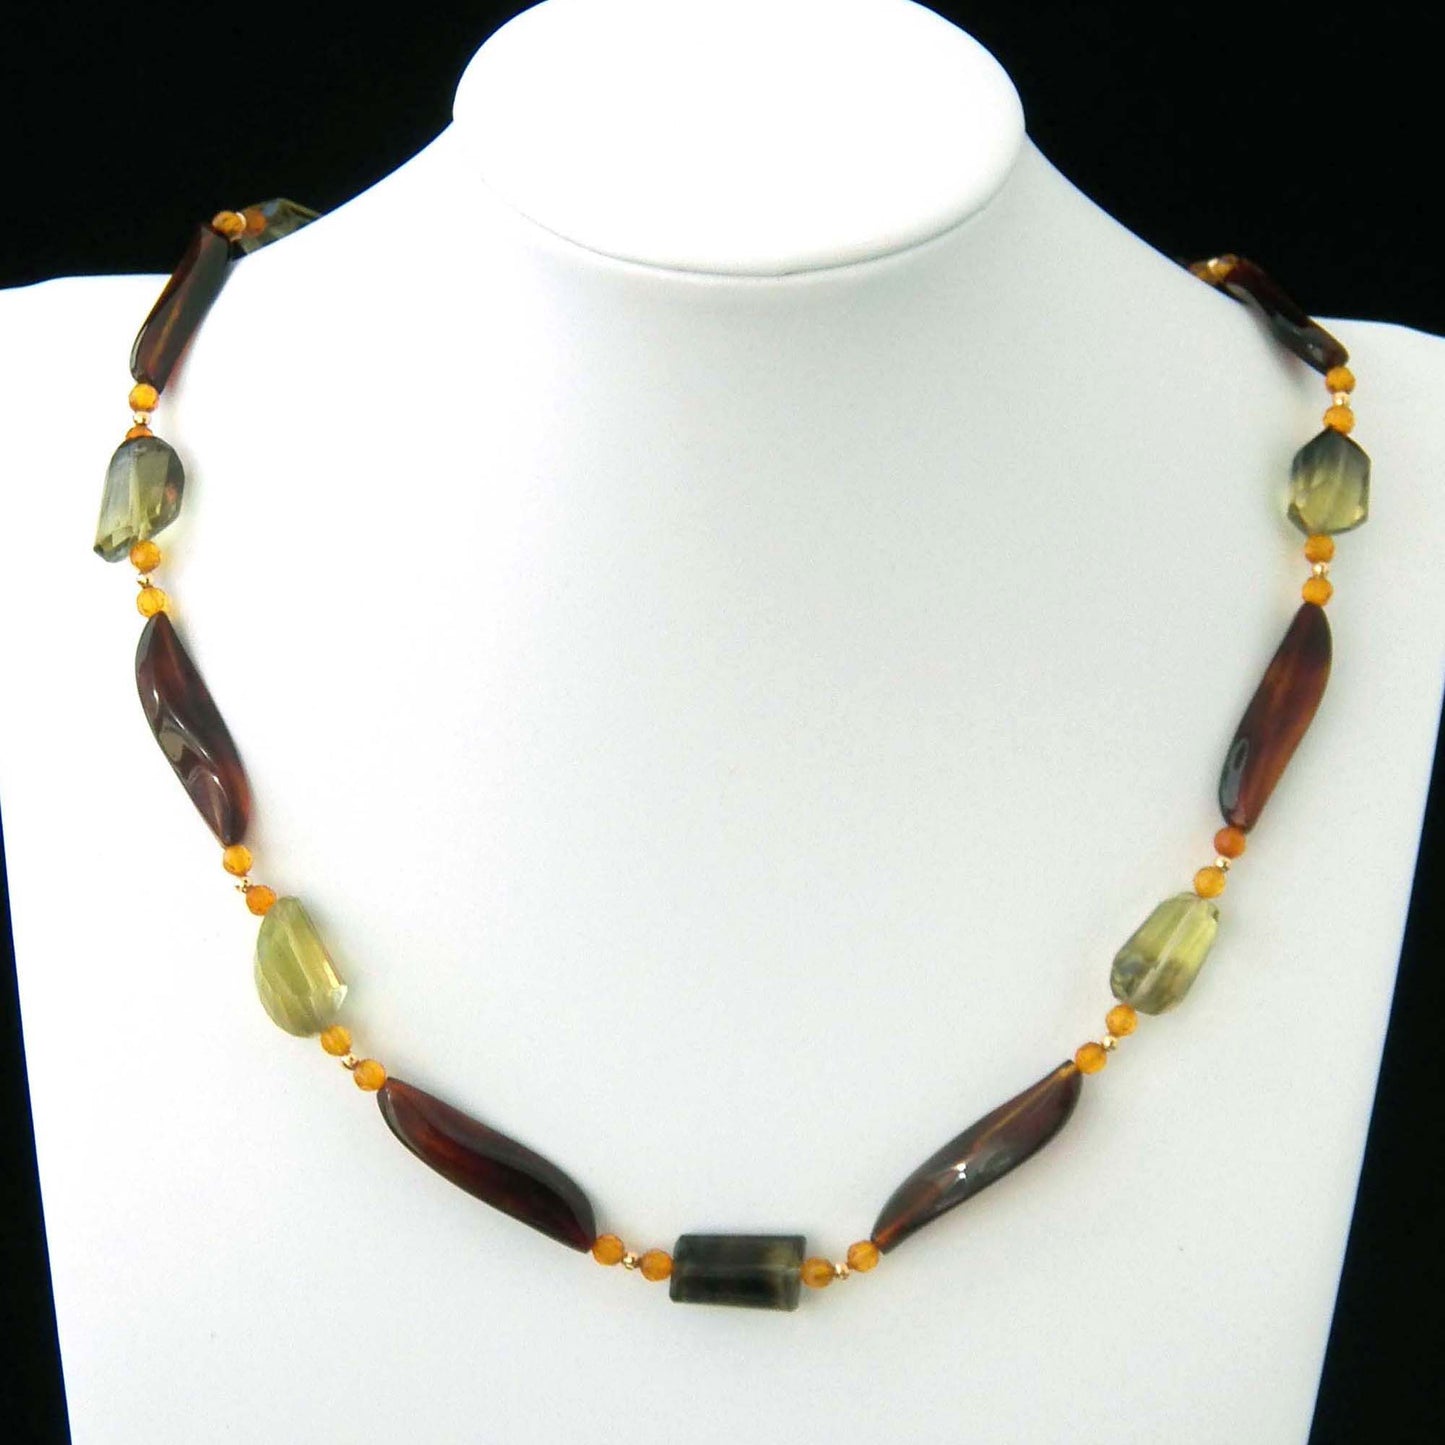 Multi-Gemstone Beaded Necklace, Green Amethyst, Tortoise Shell, Faceted Amber, Vintage 1960s Jewelry